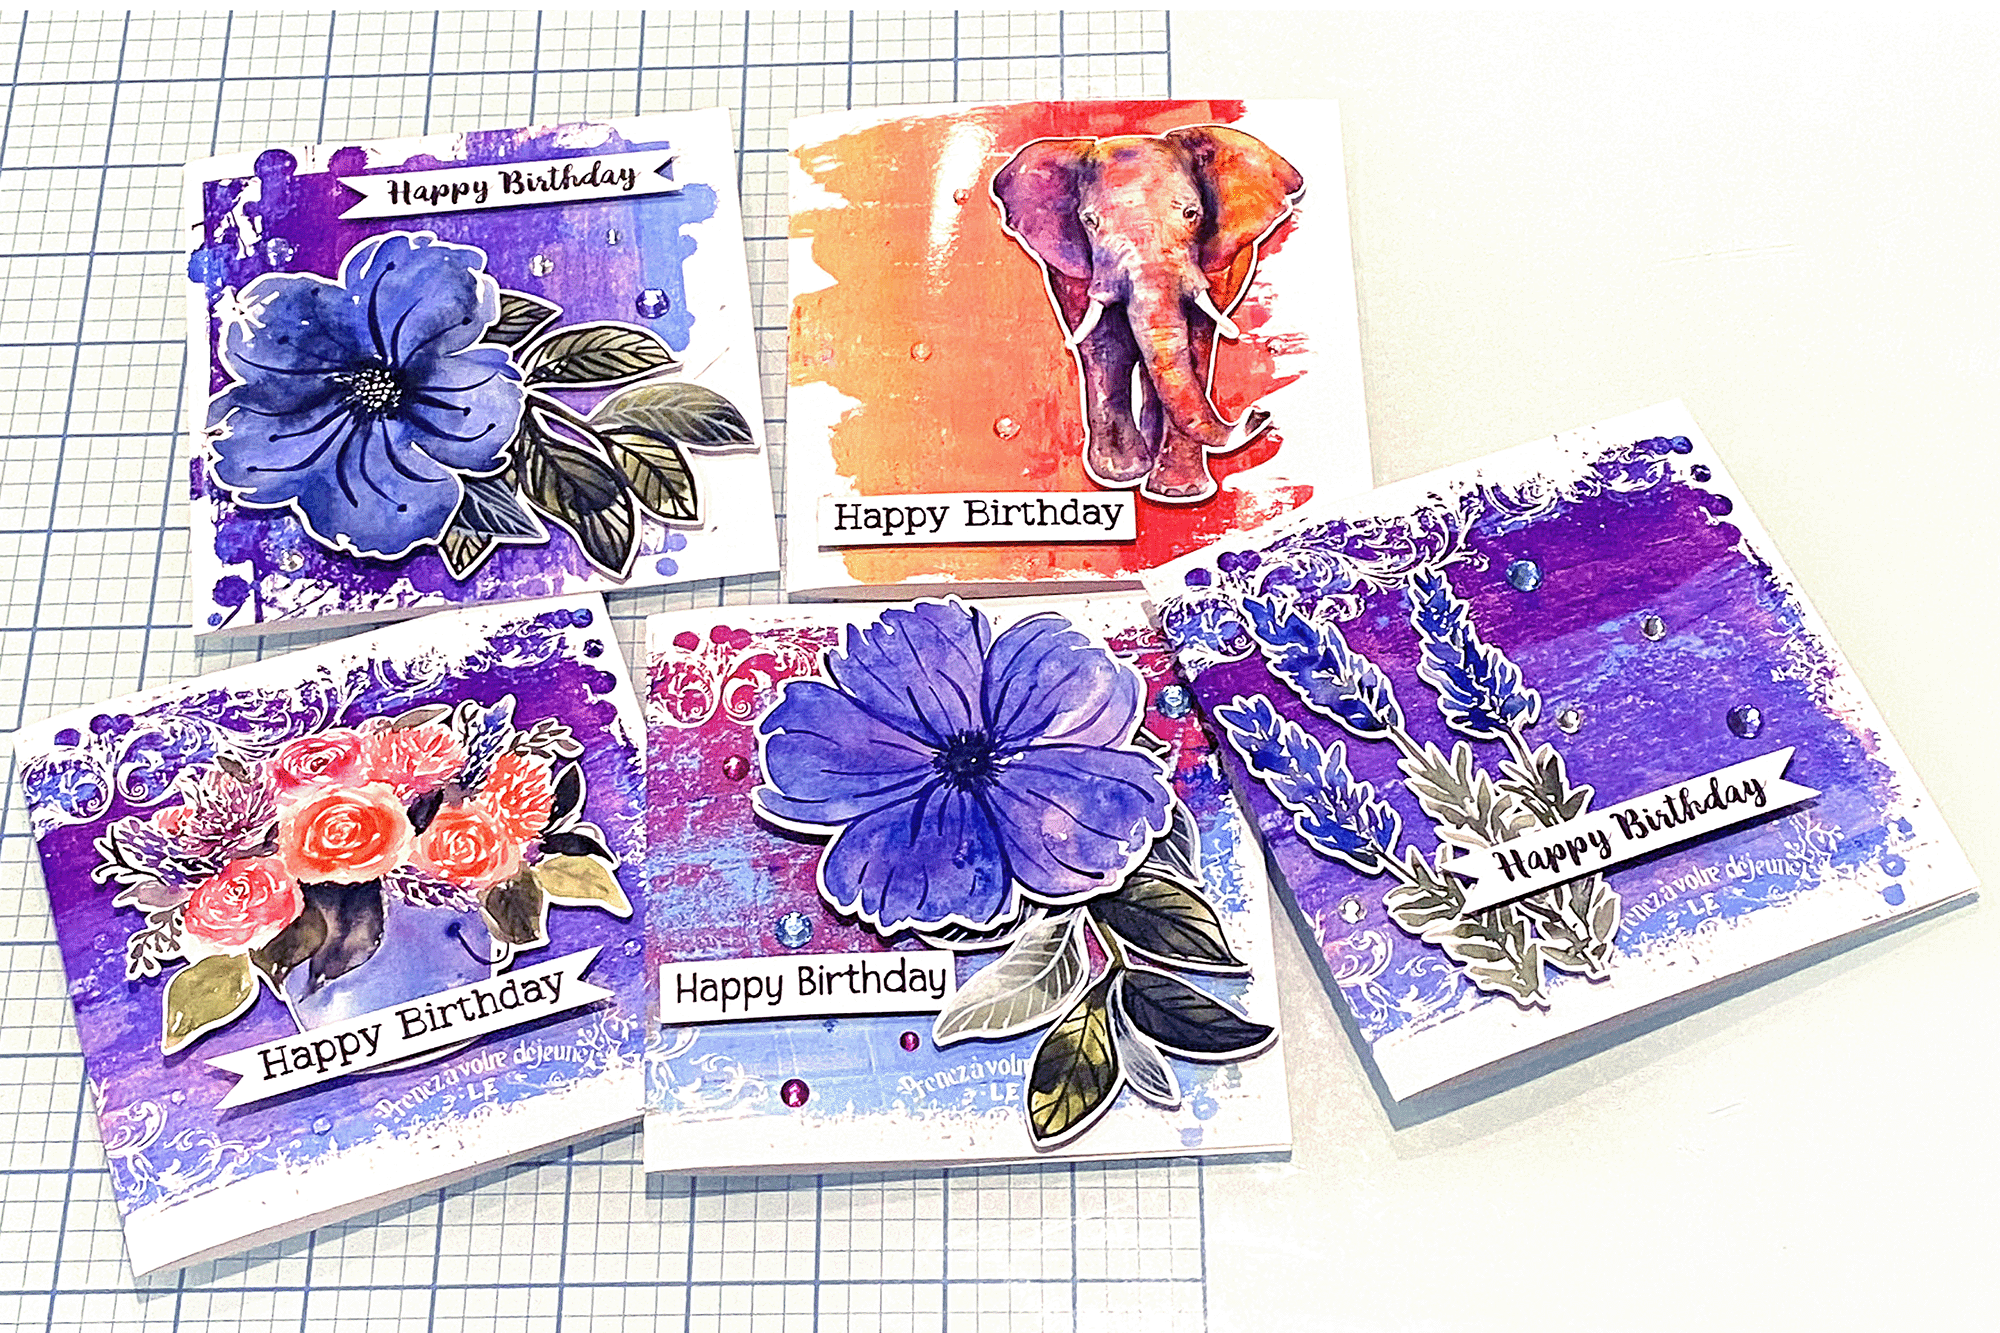 Grunge Monprint Cards using SVG Clipping Masks and Watercolor Print and Cut Images by Clikchic Designs